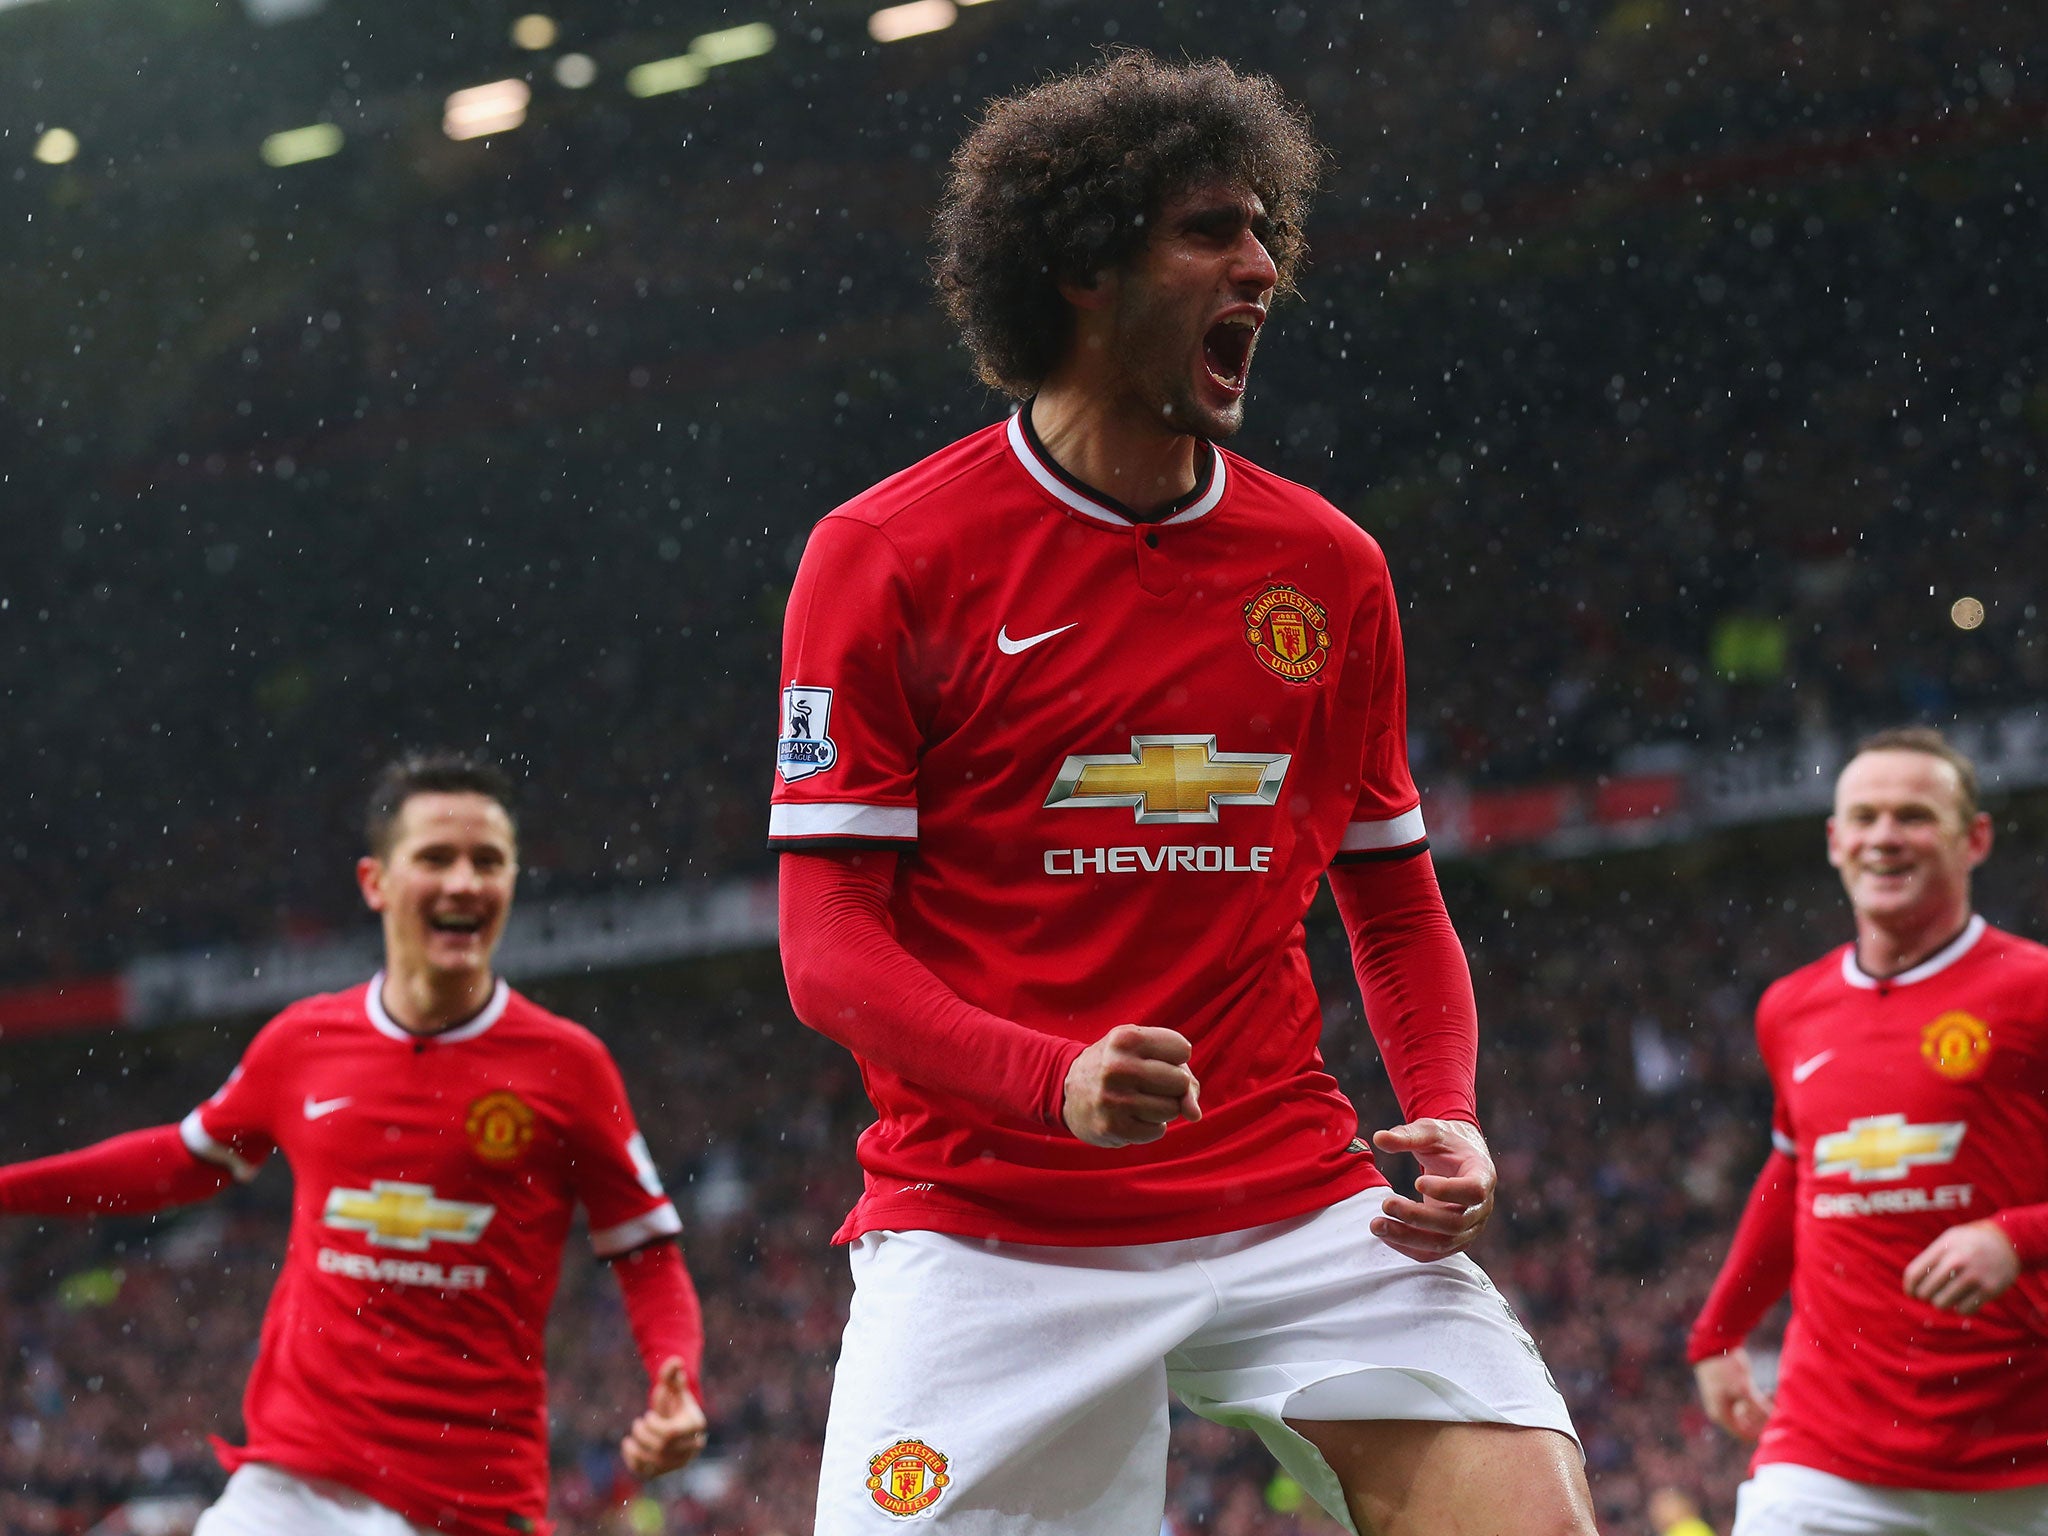 Marouane Fellaini celebrates after scoring United’s second goal with a powerful header in their 4-2 win over City in the Manchester derby at Old Trafford